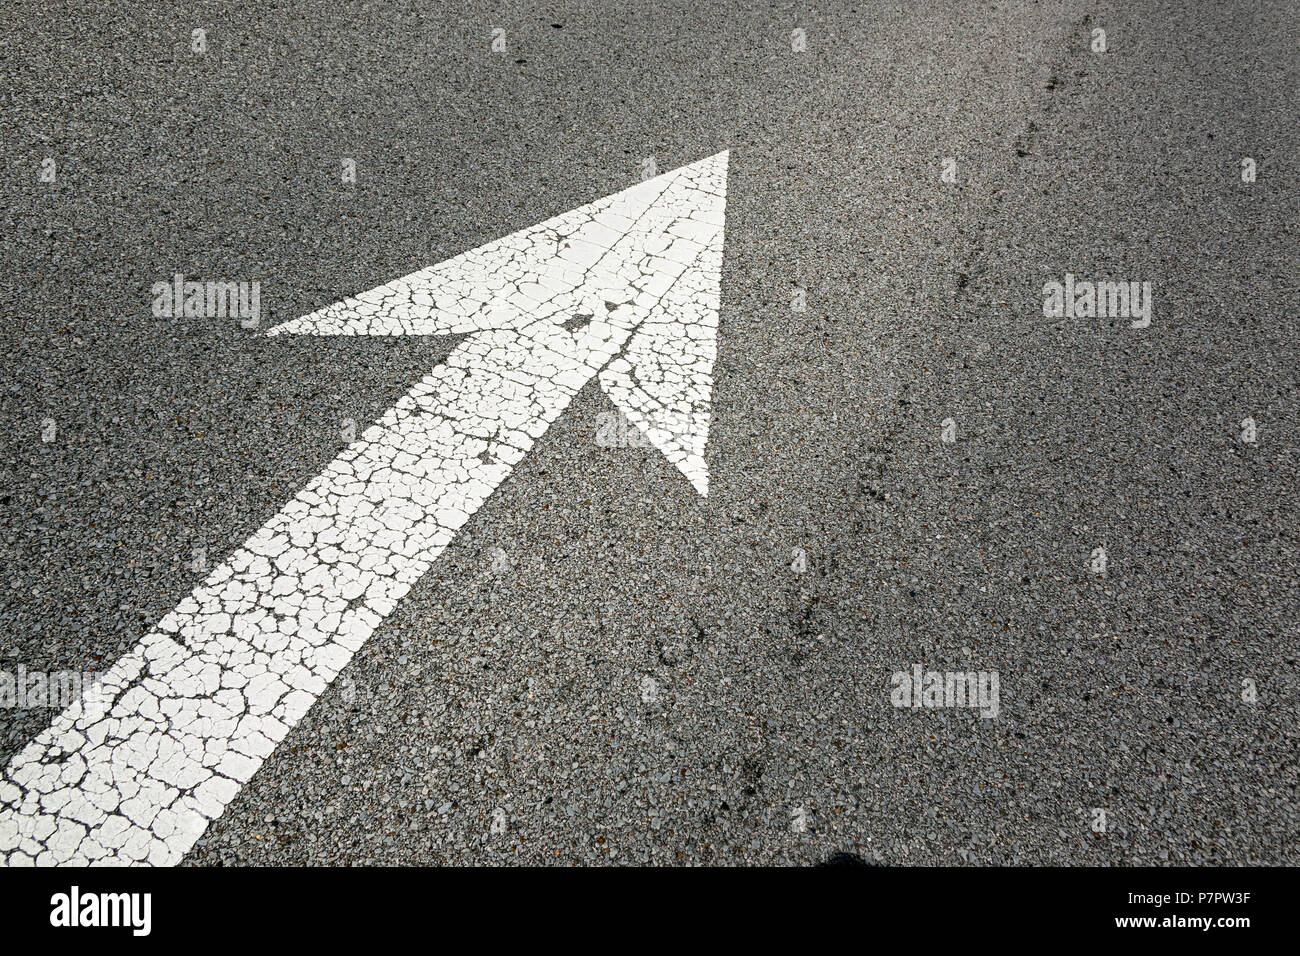 an image of an arrow sign on the road Stock Photo